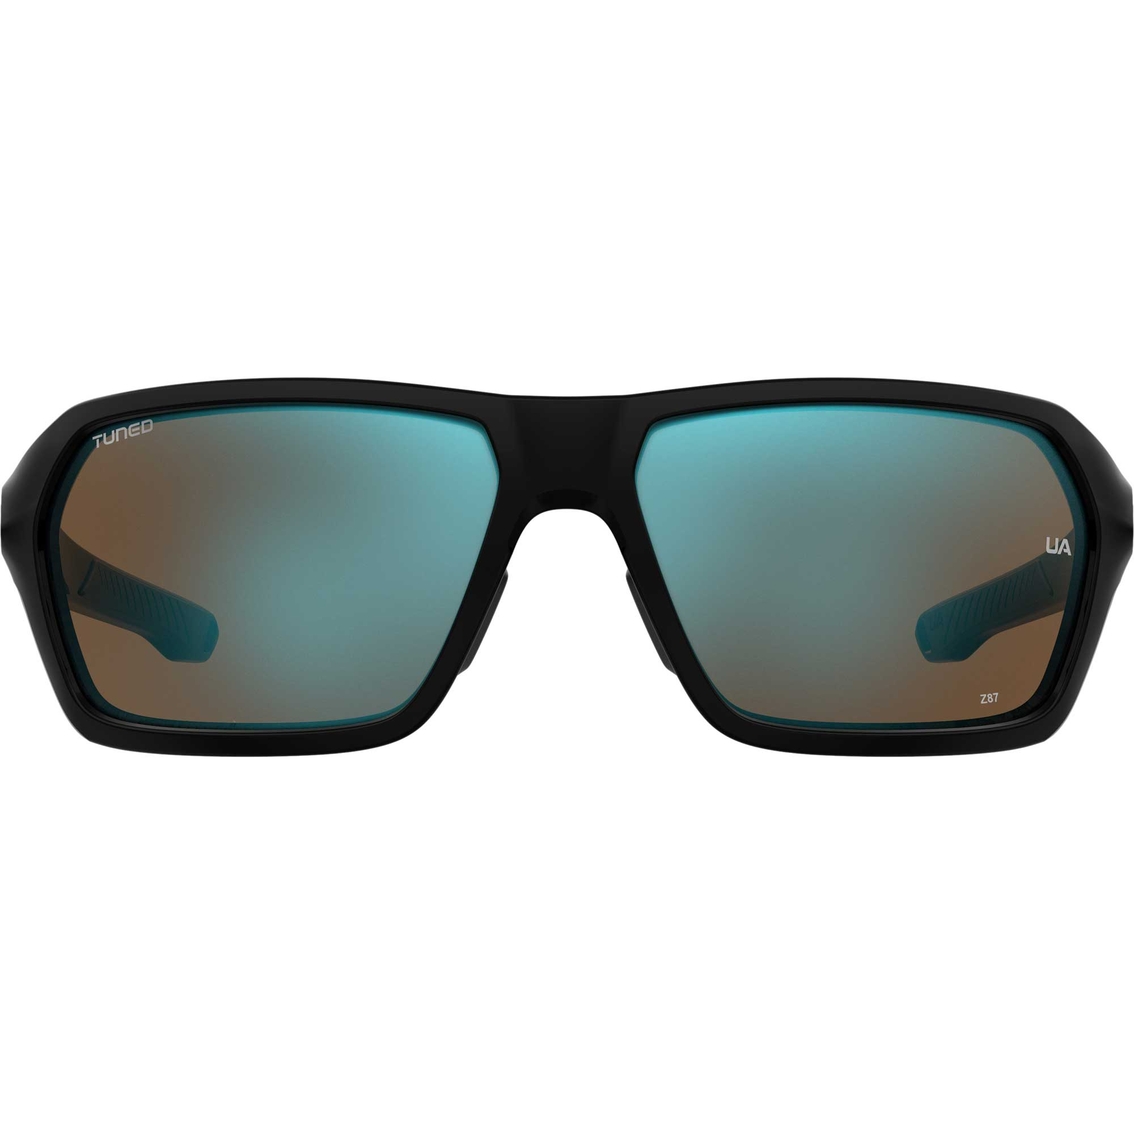 Under Armour Recon Sunglasses 0003KA - Image 2 of 3